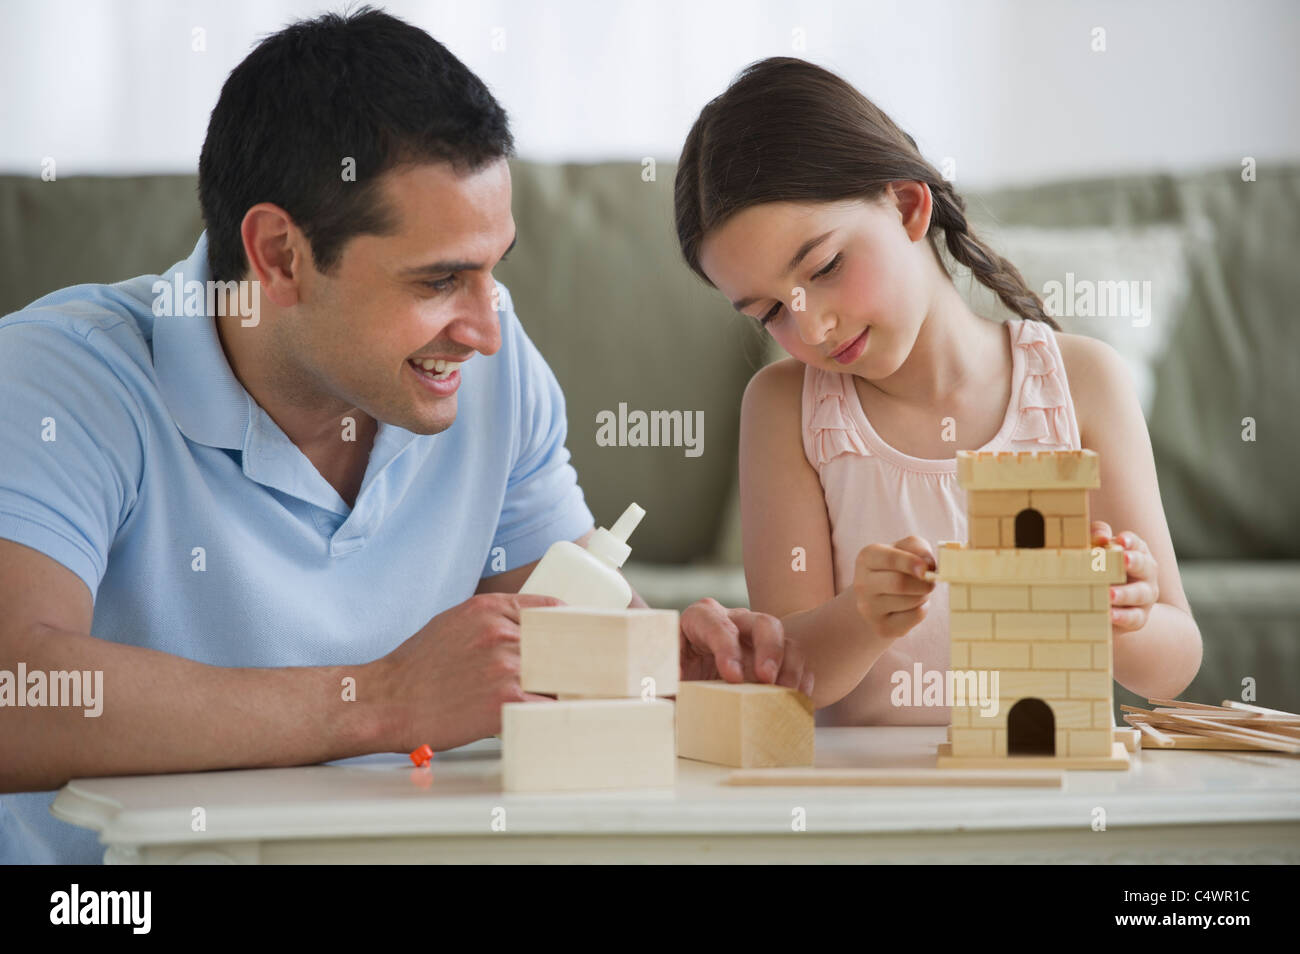 USA,New Jersey,Jersey City,father and daughter (8-9) building toy castle Stock Photo